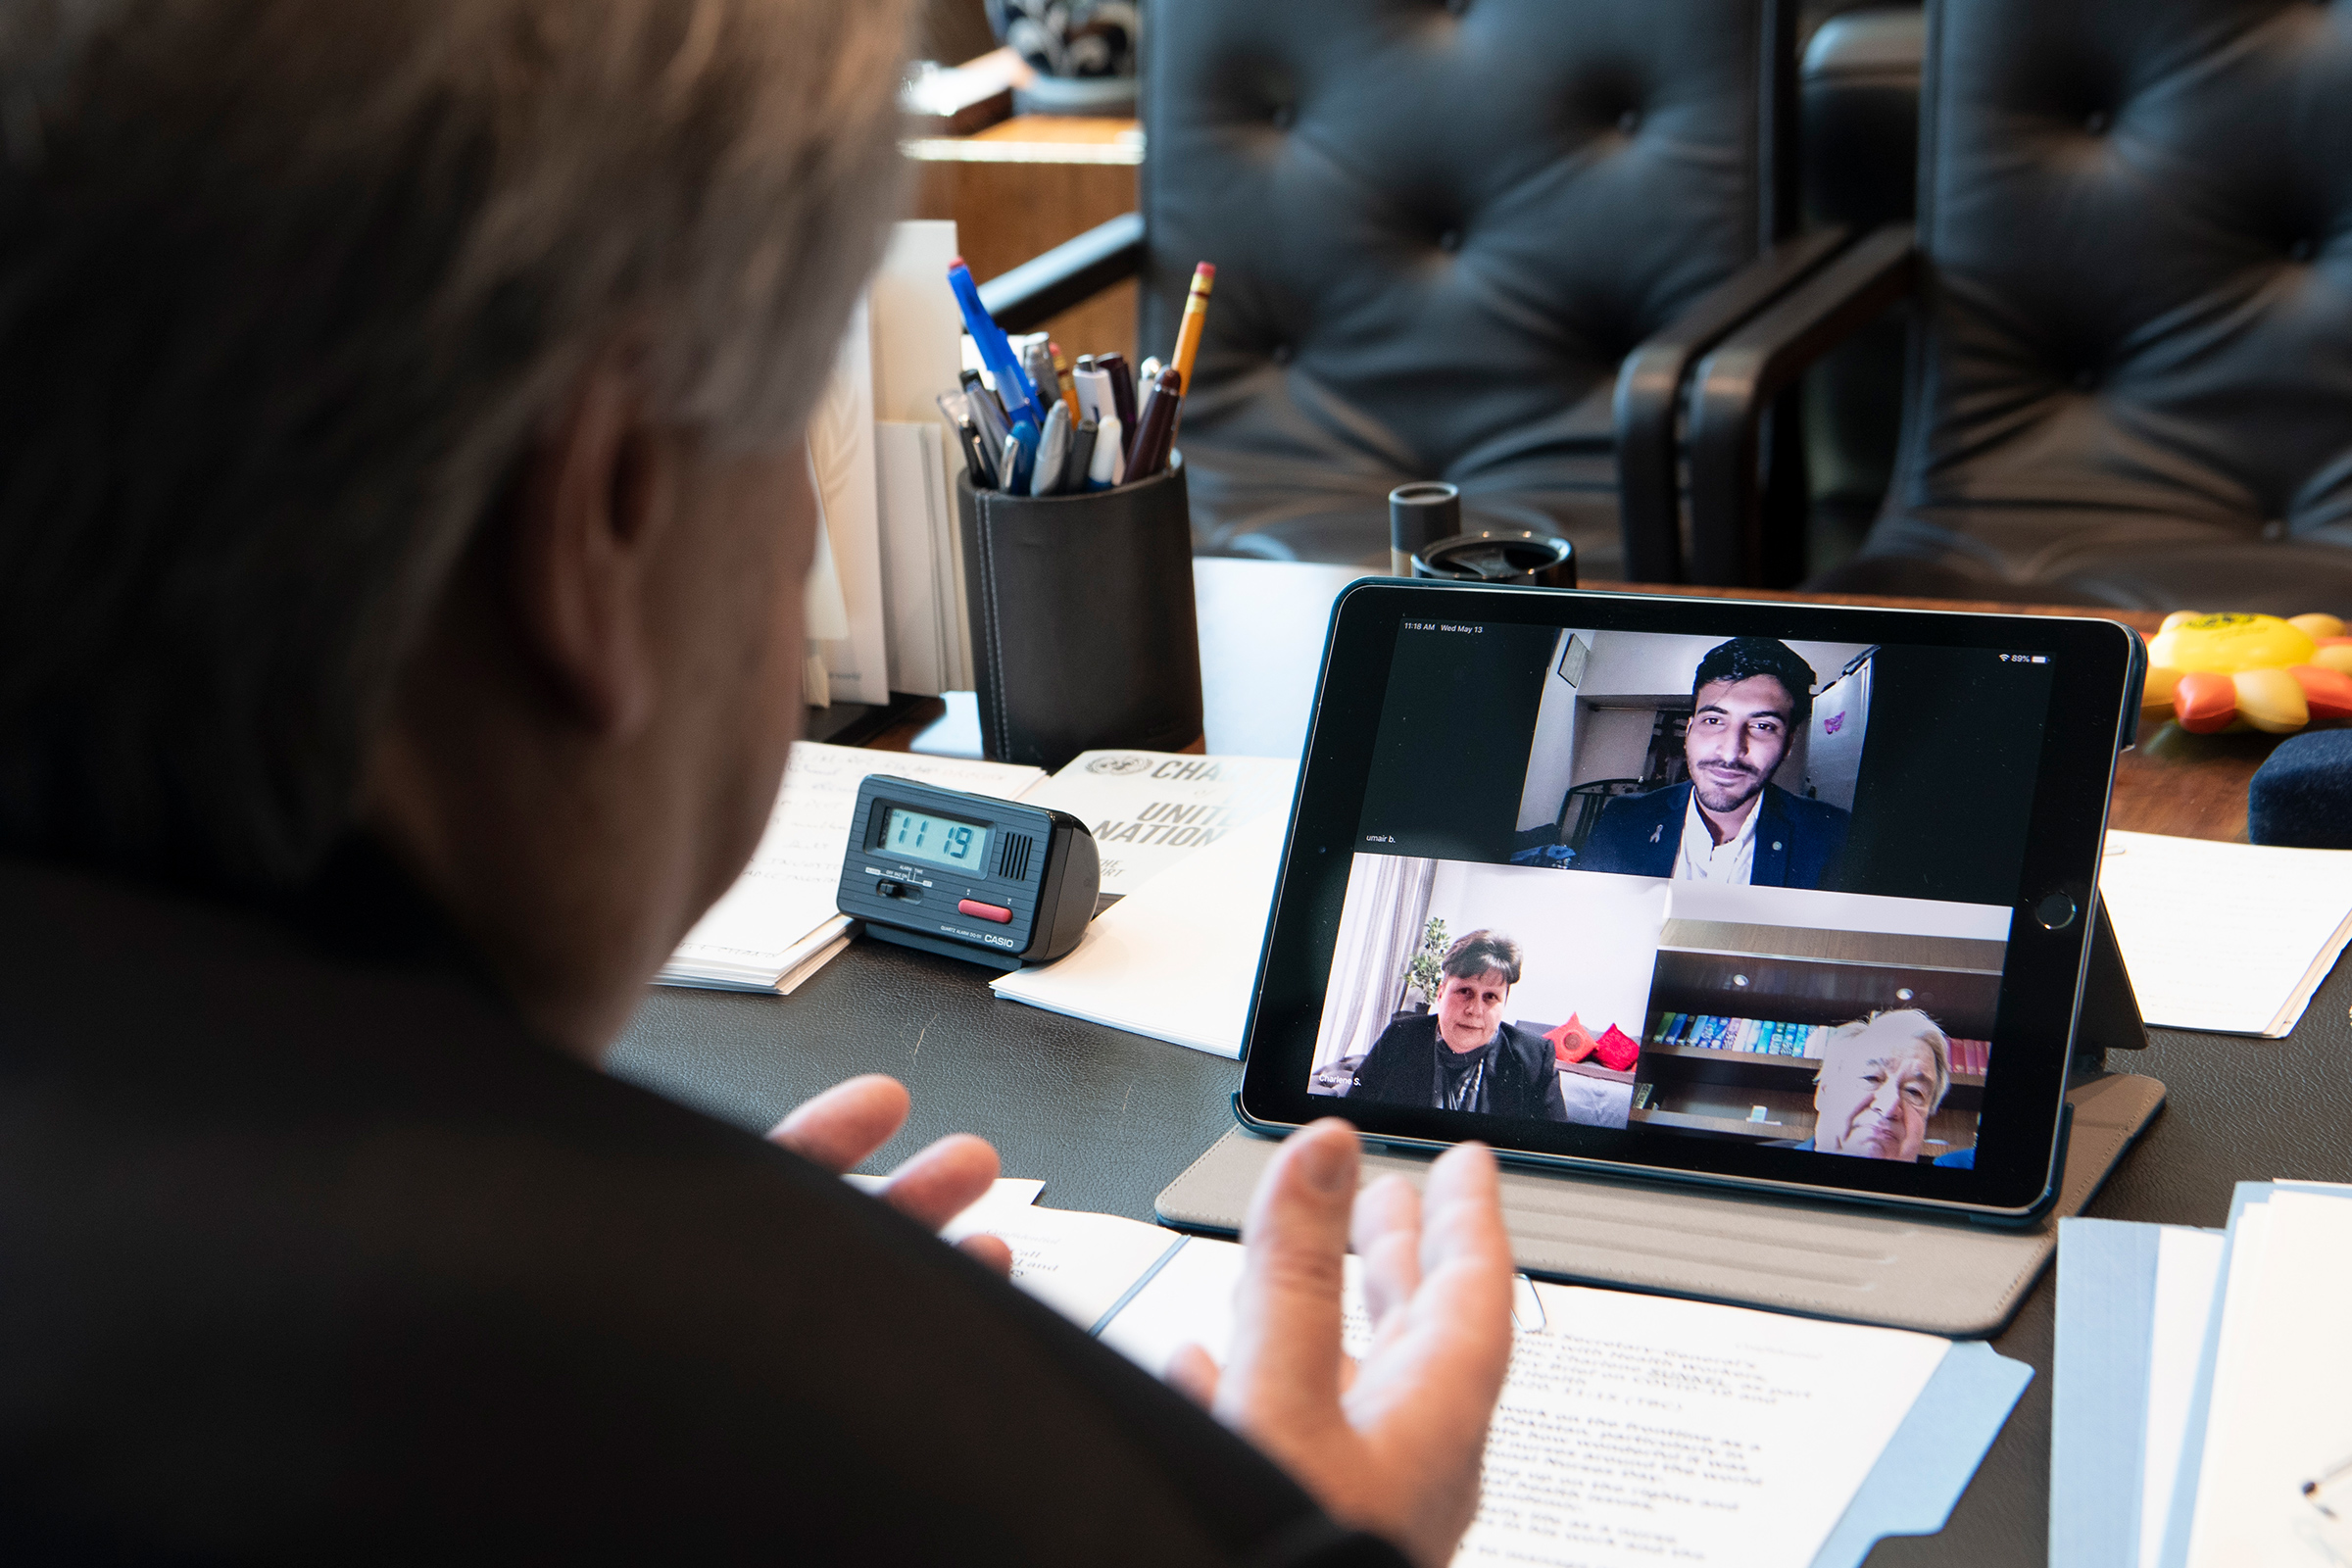 Guterres in a three-way video call with frontline mental health workers, Mr. Umair Bachlani in Pakistan and Ms. Charlene Sunkel in South Africa. (Eskinder Debebe—UN Photo.)